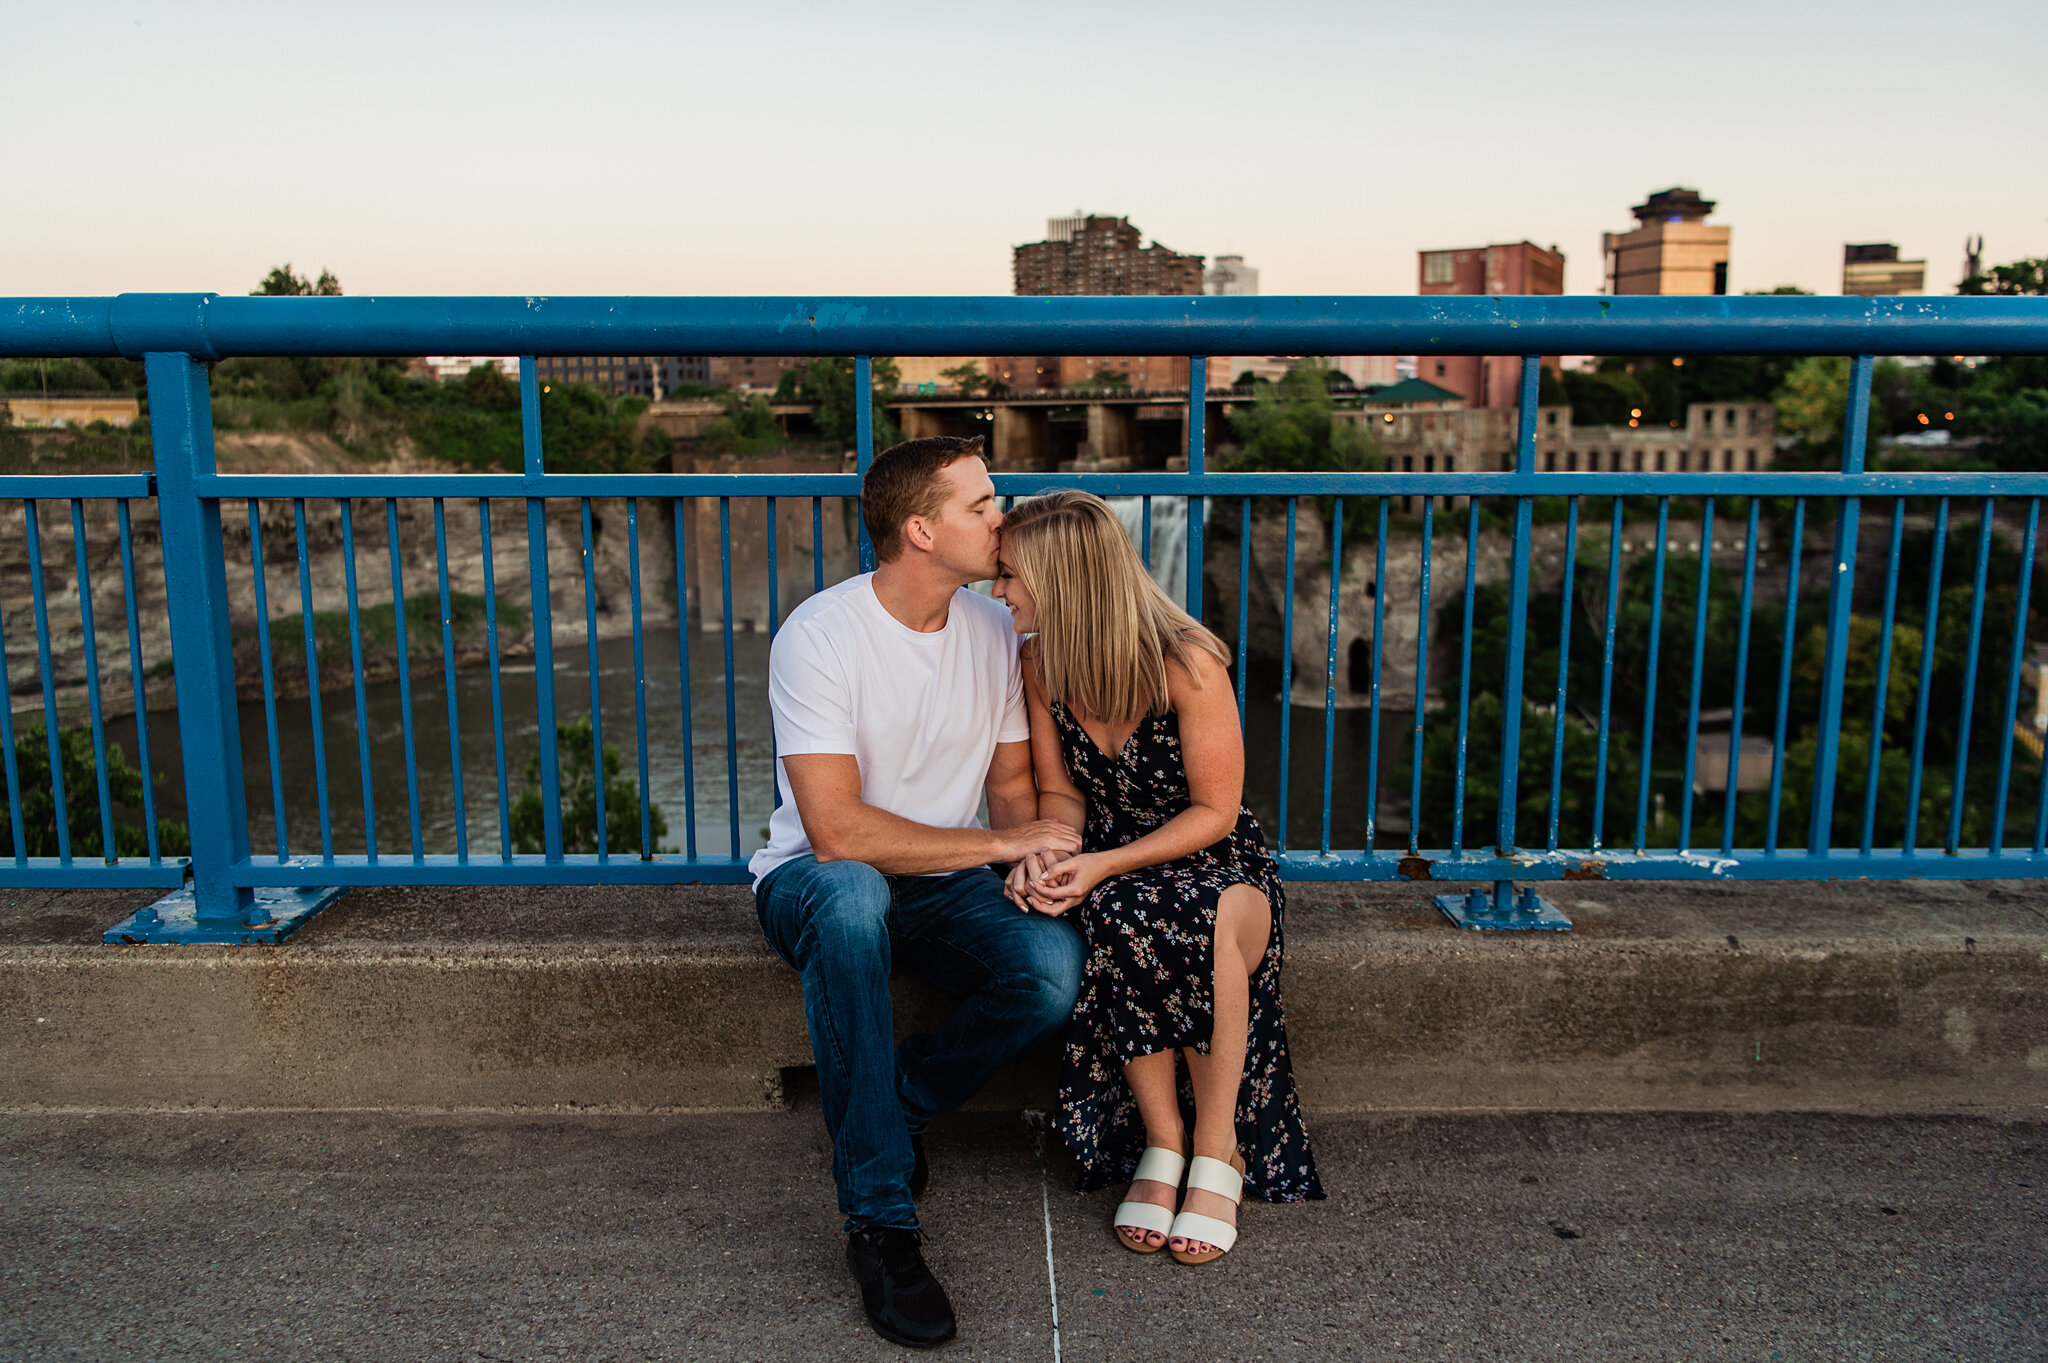 Genesee_Brew_House_High_Falls_Rochester_Engagement_Session_JILL_STUDIO_Rochester_NY_Photographer_5917.jpg